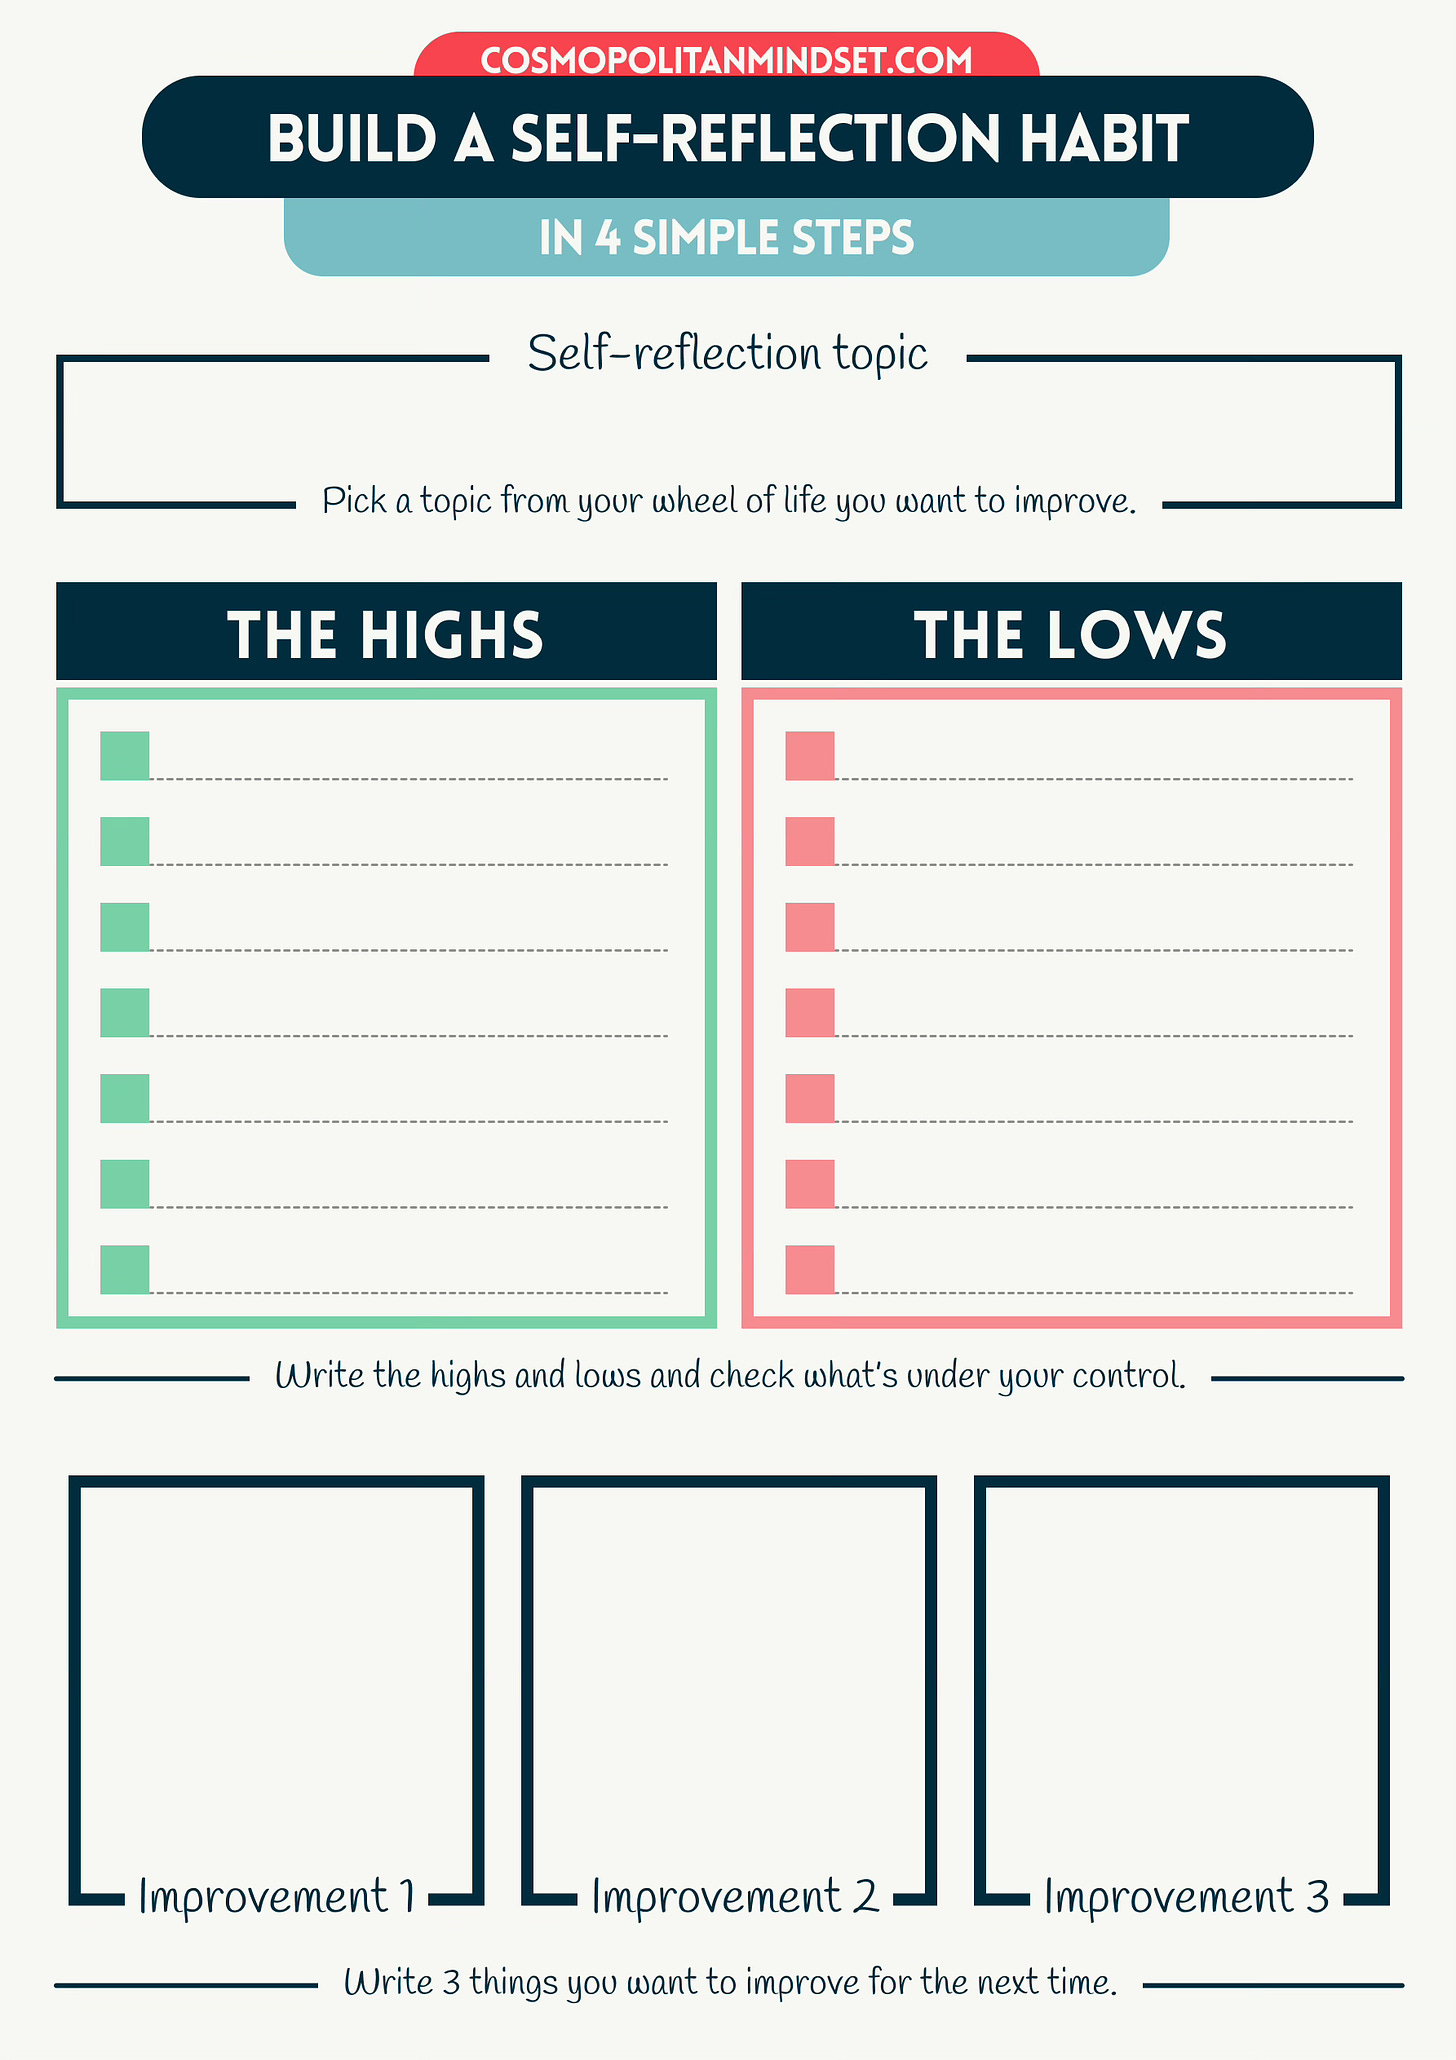 How To Build a Self-Reflection Habit in 4 Simple Steps